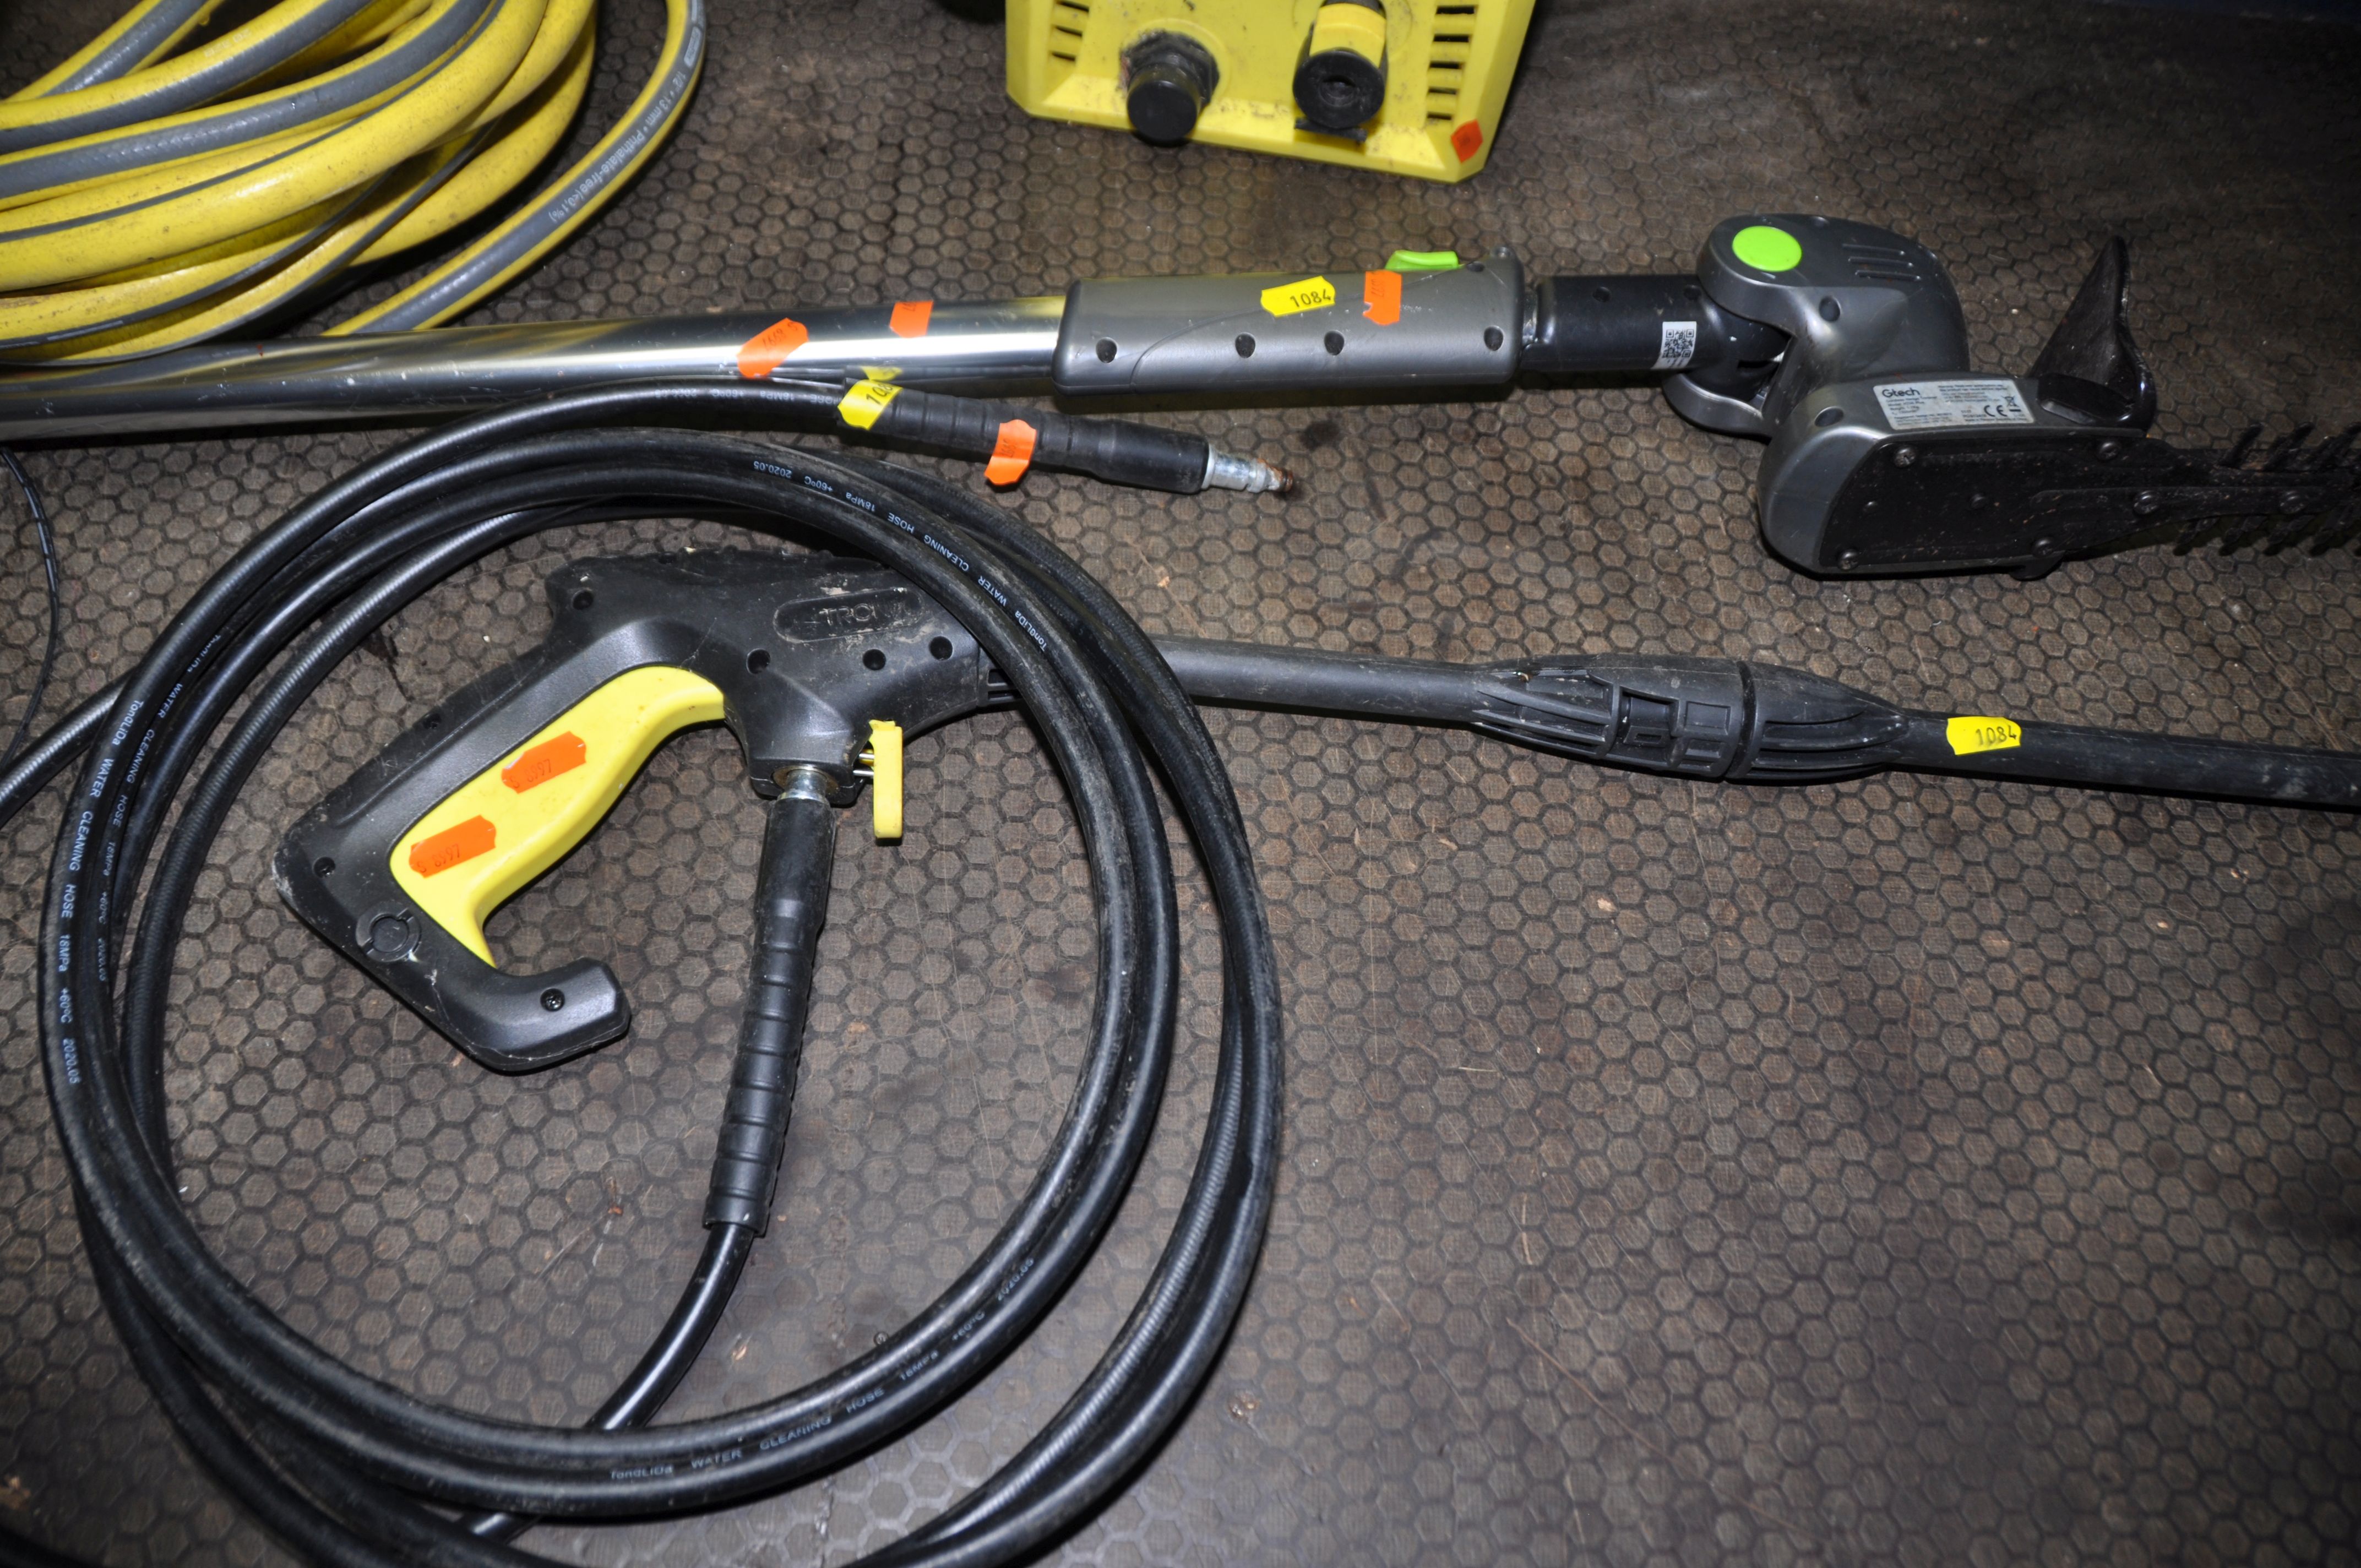 A G TECH HT05PLUS CORDLESS HEDGE TRIMMER and a Vytronix jet wash with lance and hose pipe (both - Image 5 of 5